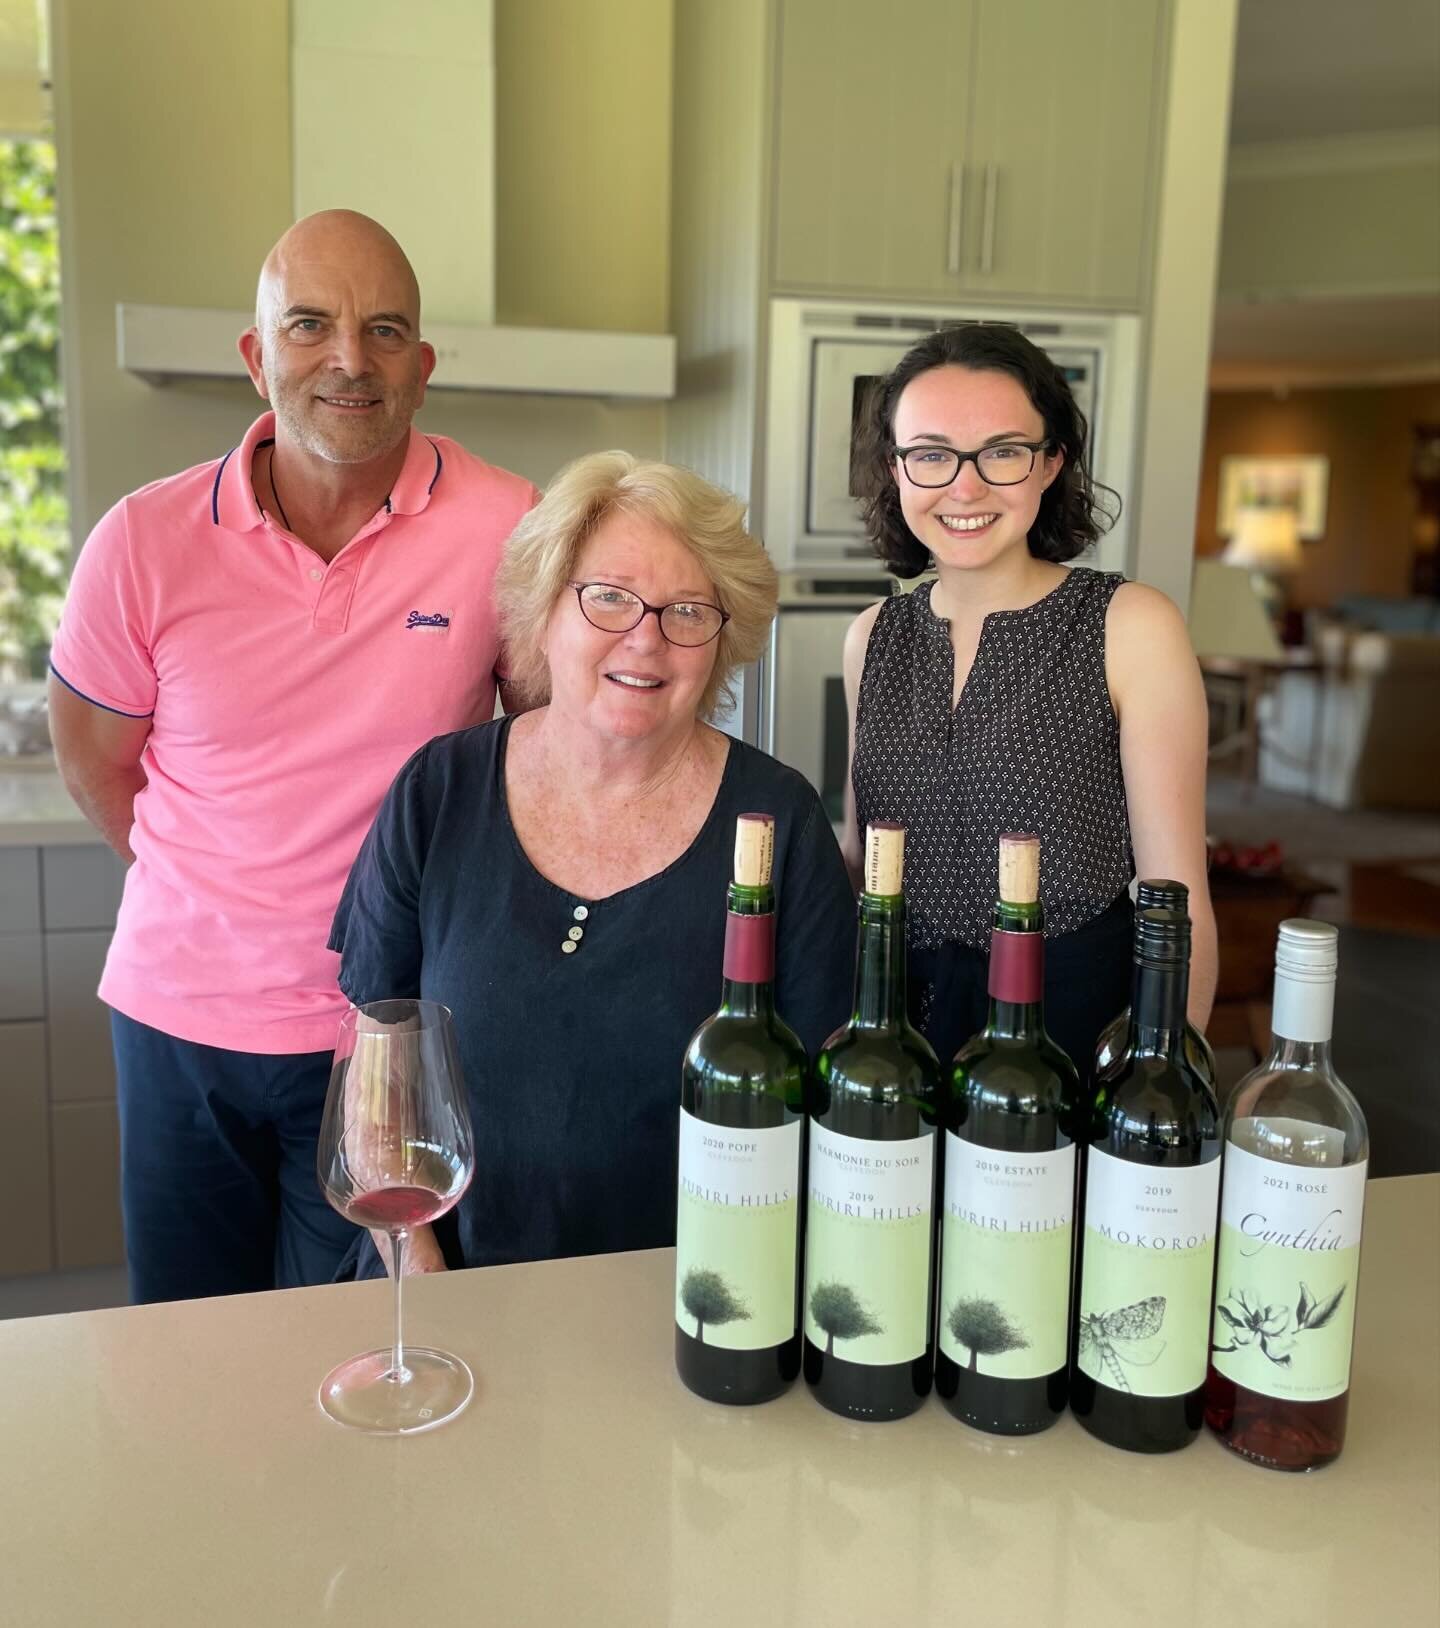 The Tamaki Makaurau (Auckland) wine region provides some very special spots and unique wines. 

South of the city is Clevedon, and arguably the most significant vineyard in Clevedon is Puriri Hills. 

Judy Fowler &amp; I have been friends for many ye